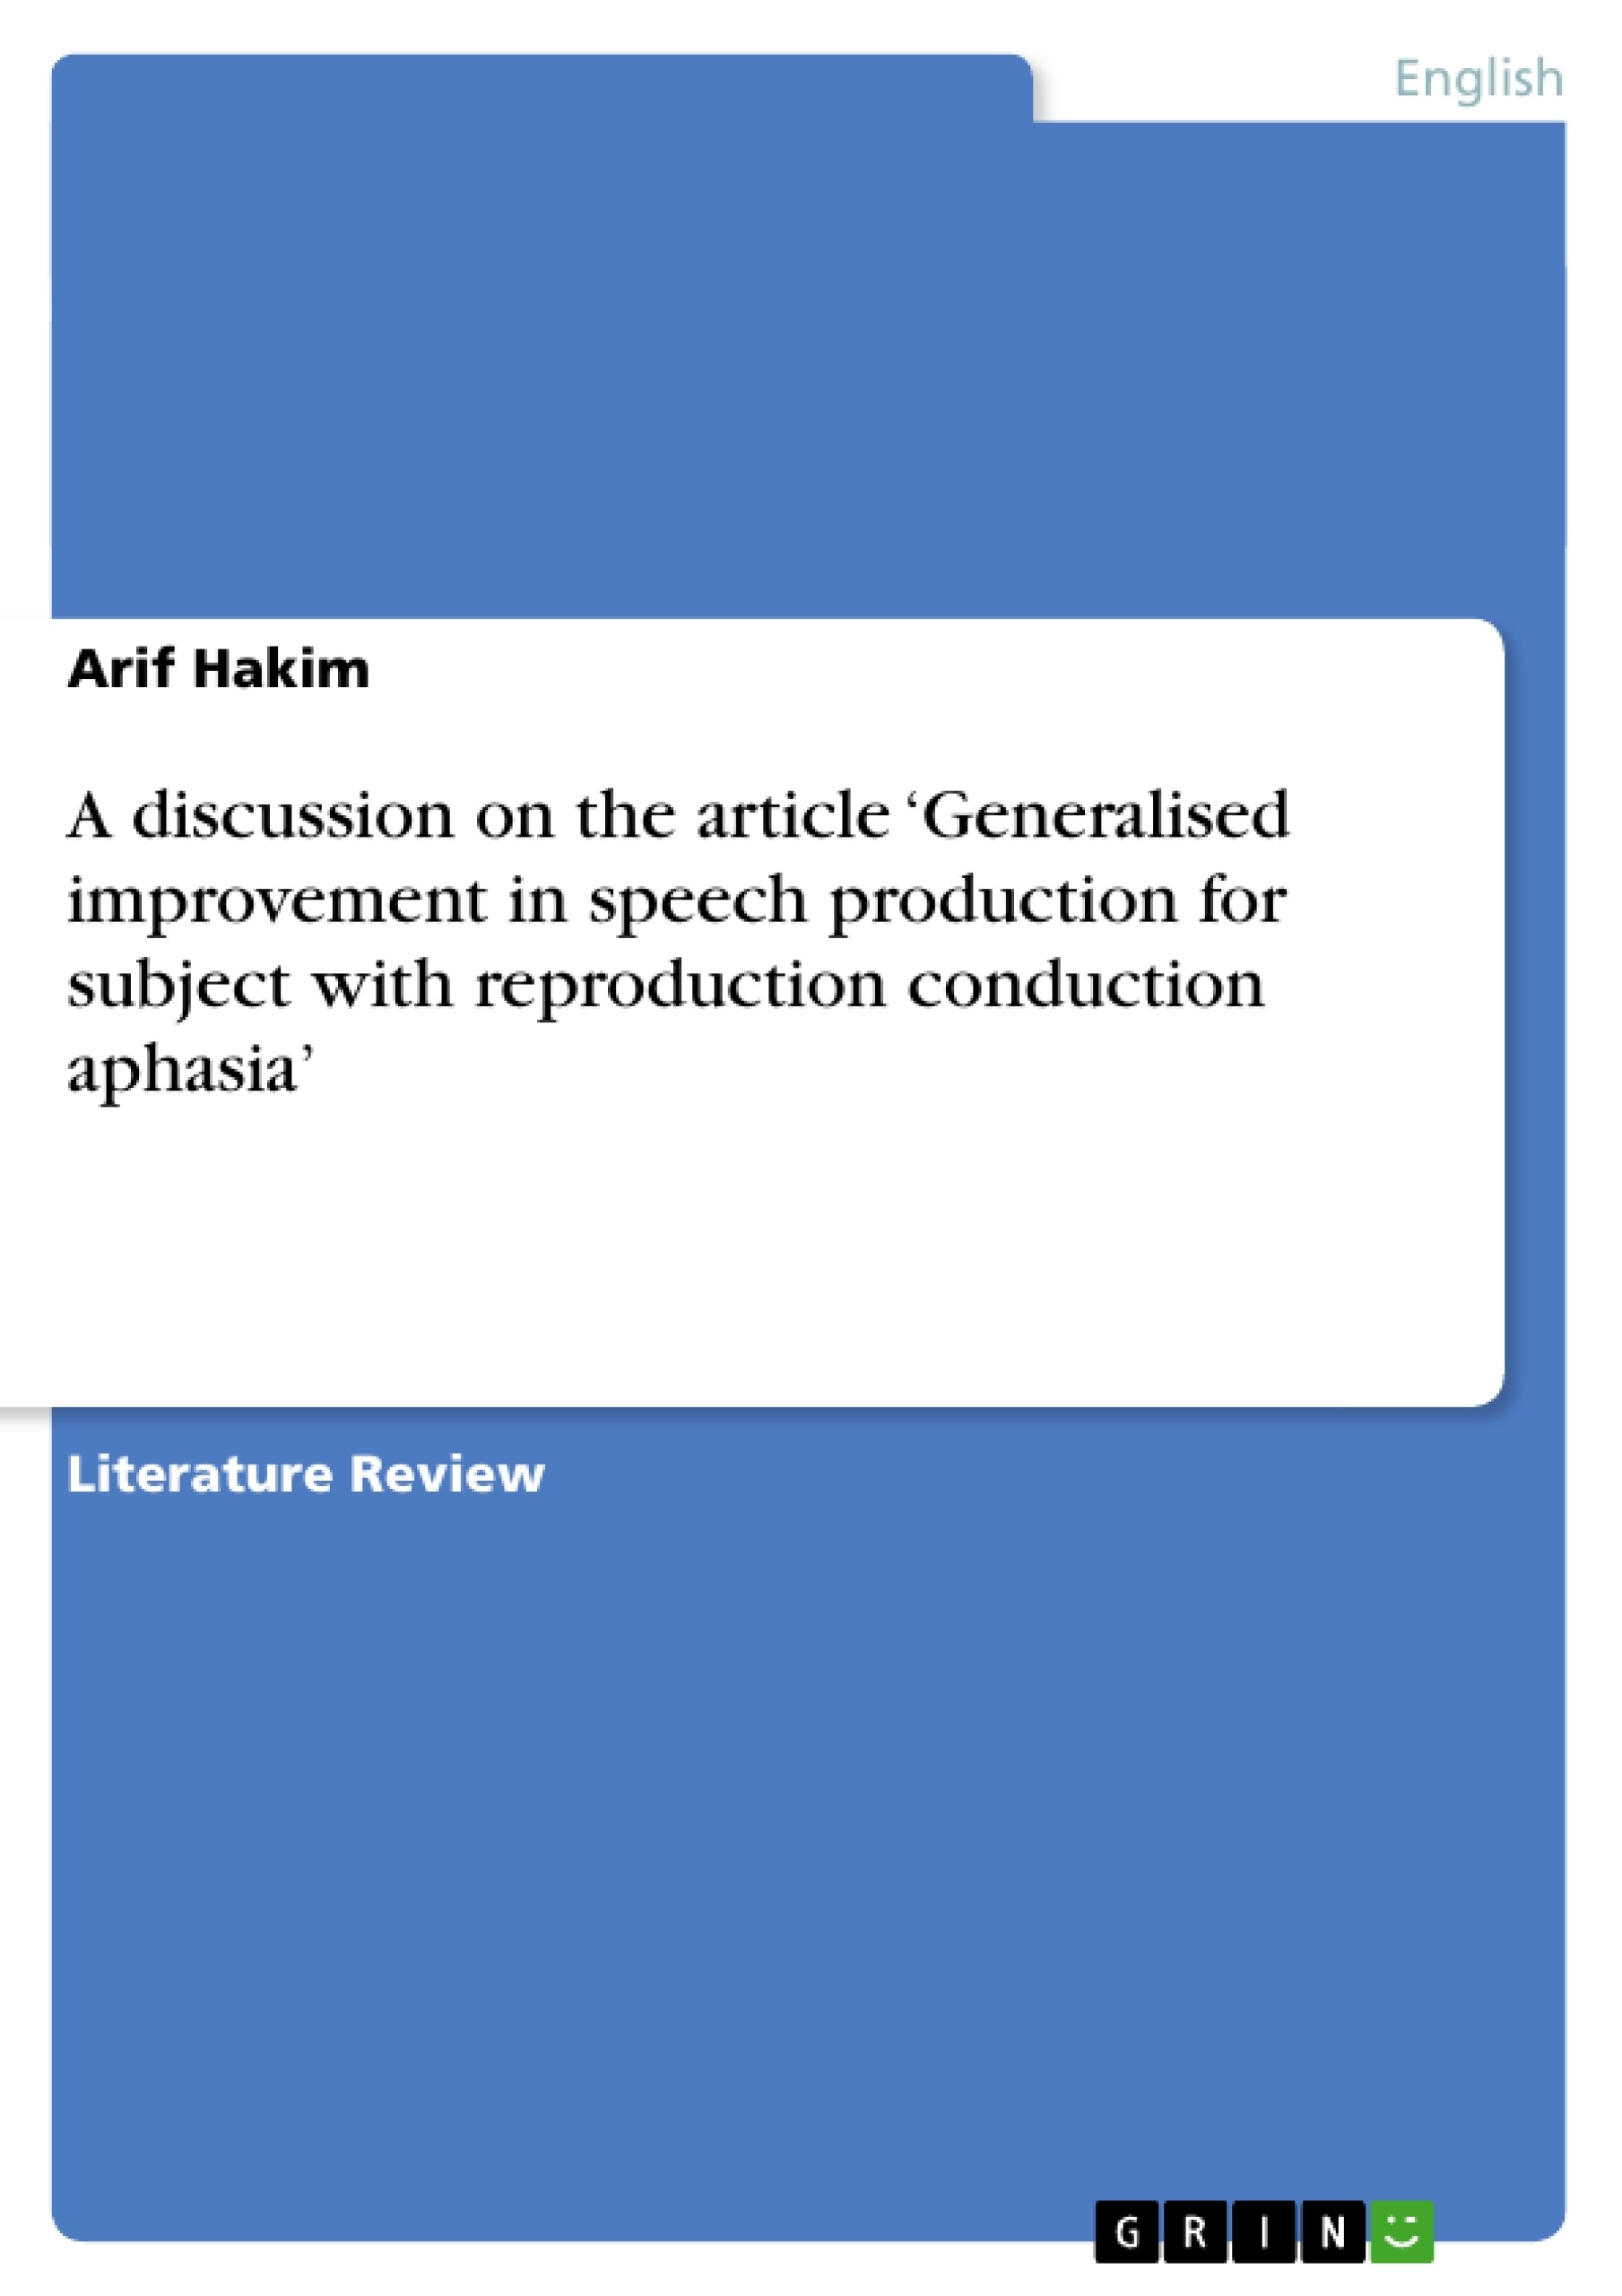 Title: A discussion on the article ‘Generalised improvement in speech production for subject with reproduction conduction aphasia’